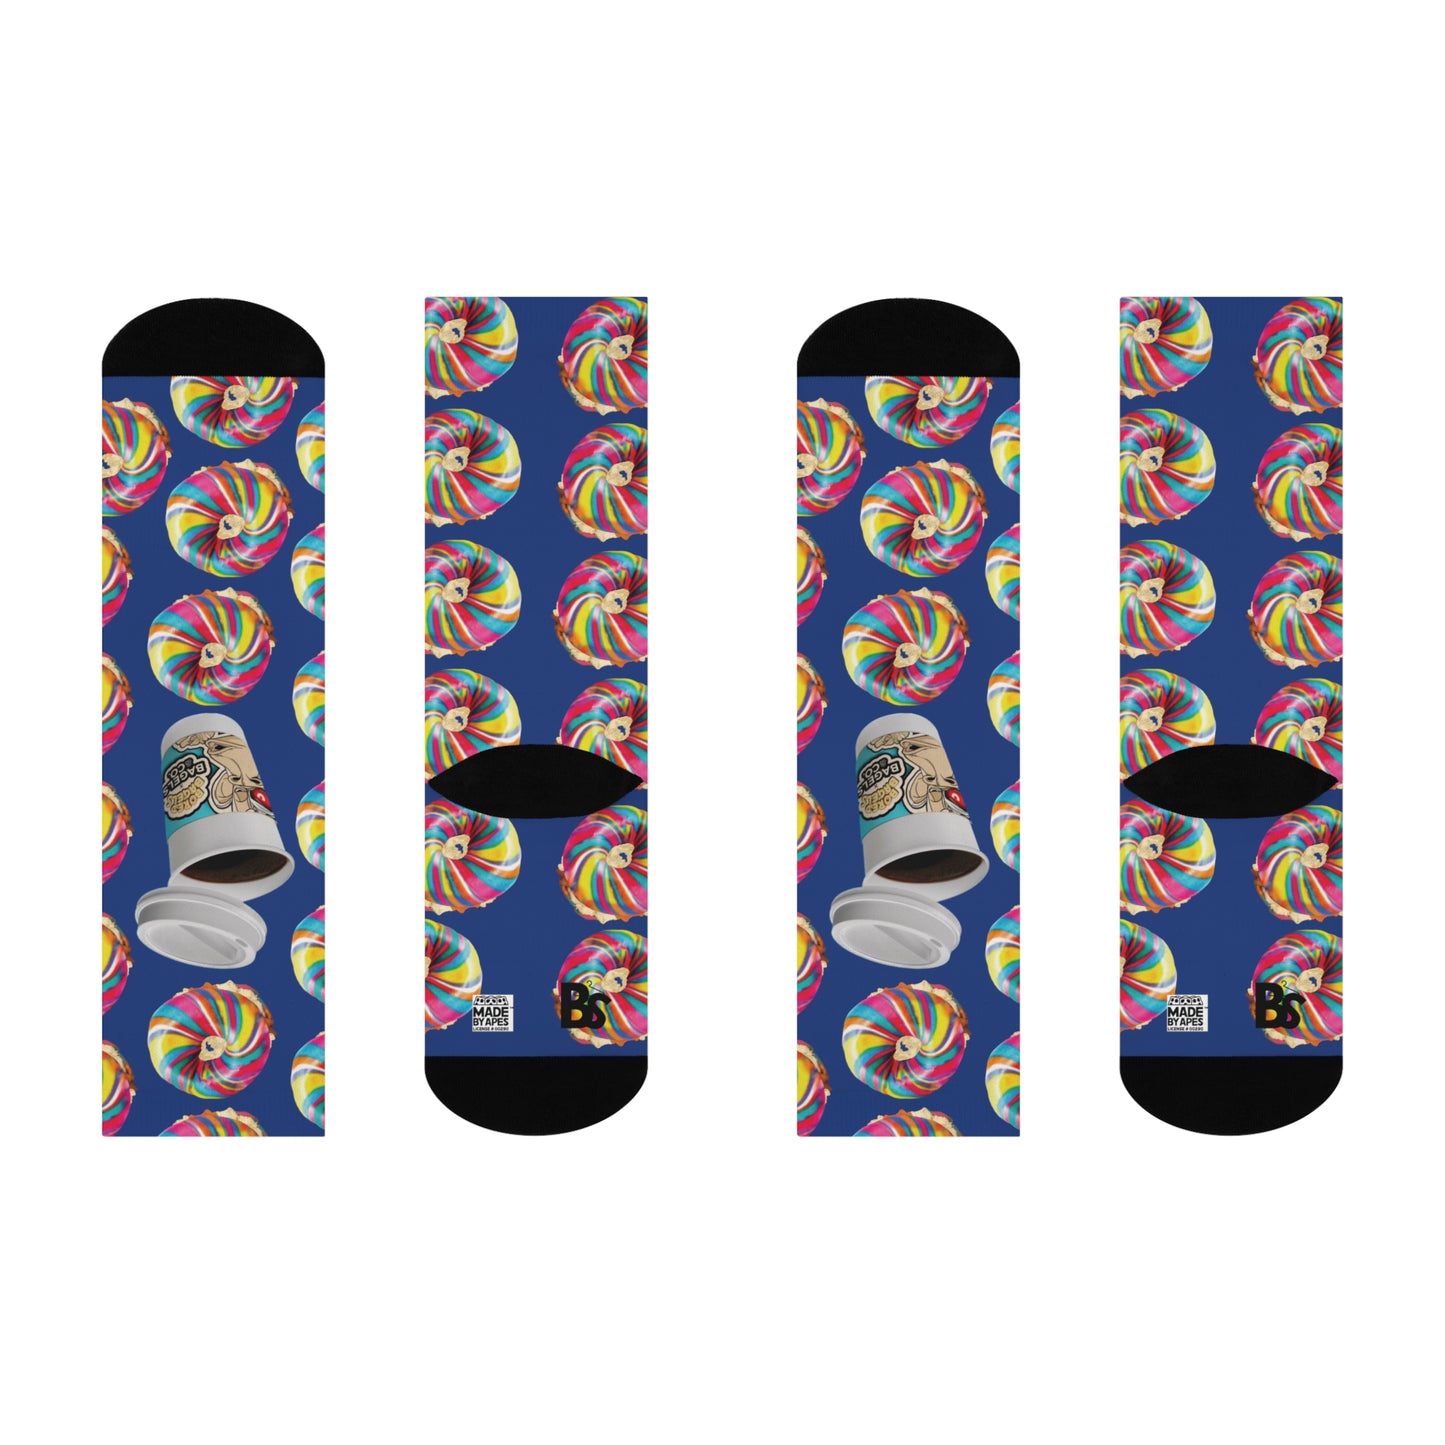 BORED SOCKS with BORED BAGELS & Lox / Midnight Blue